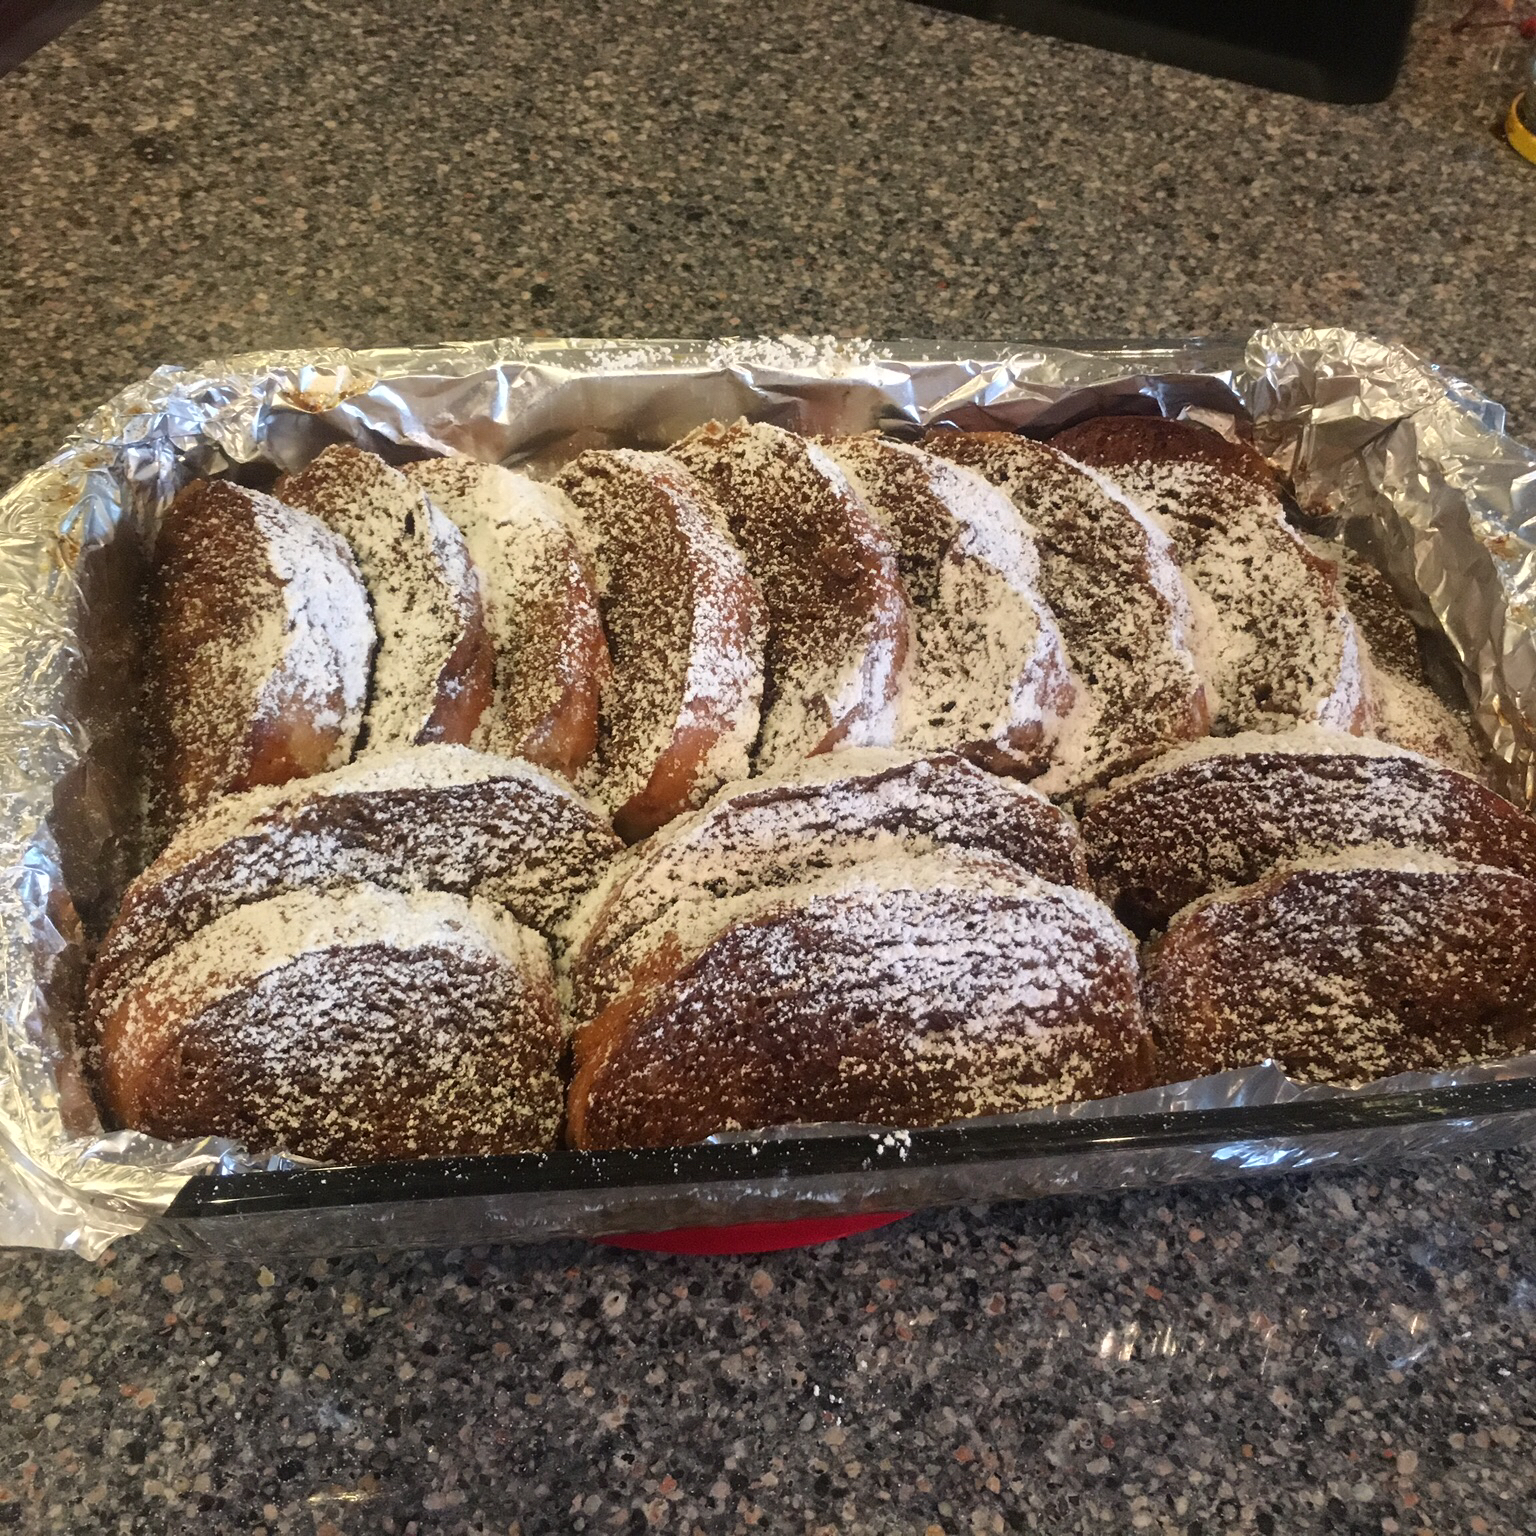 Overnight Gingerbread French Toast